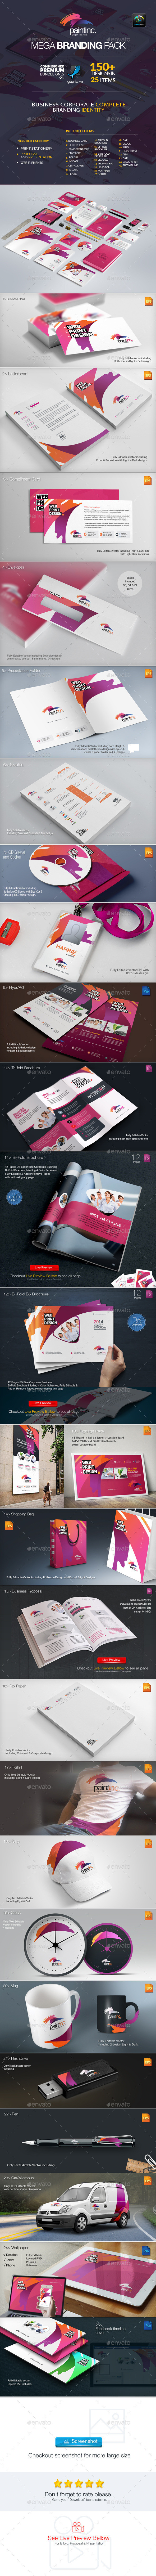 Graphicriver branding business corporate complete identity clean design stationery psd ai eps indd pptx ppt ip